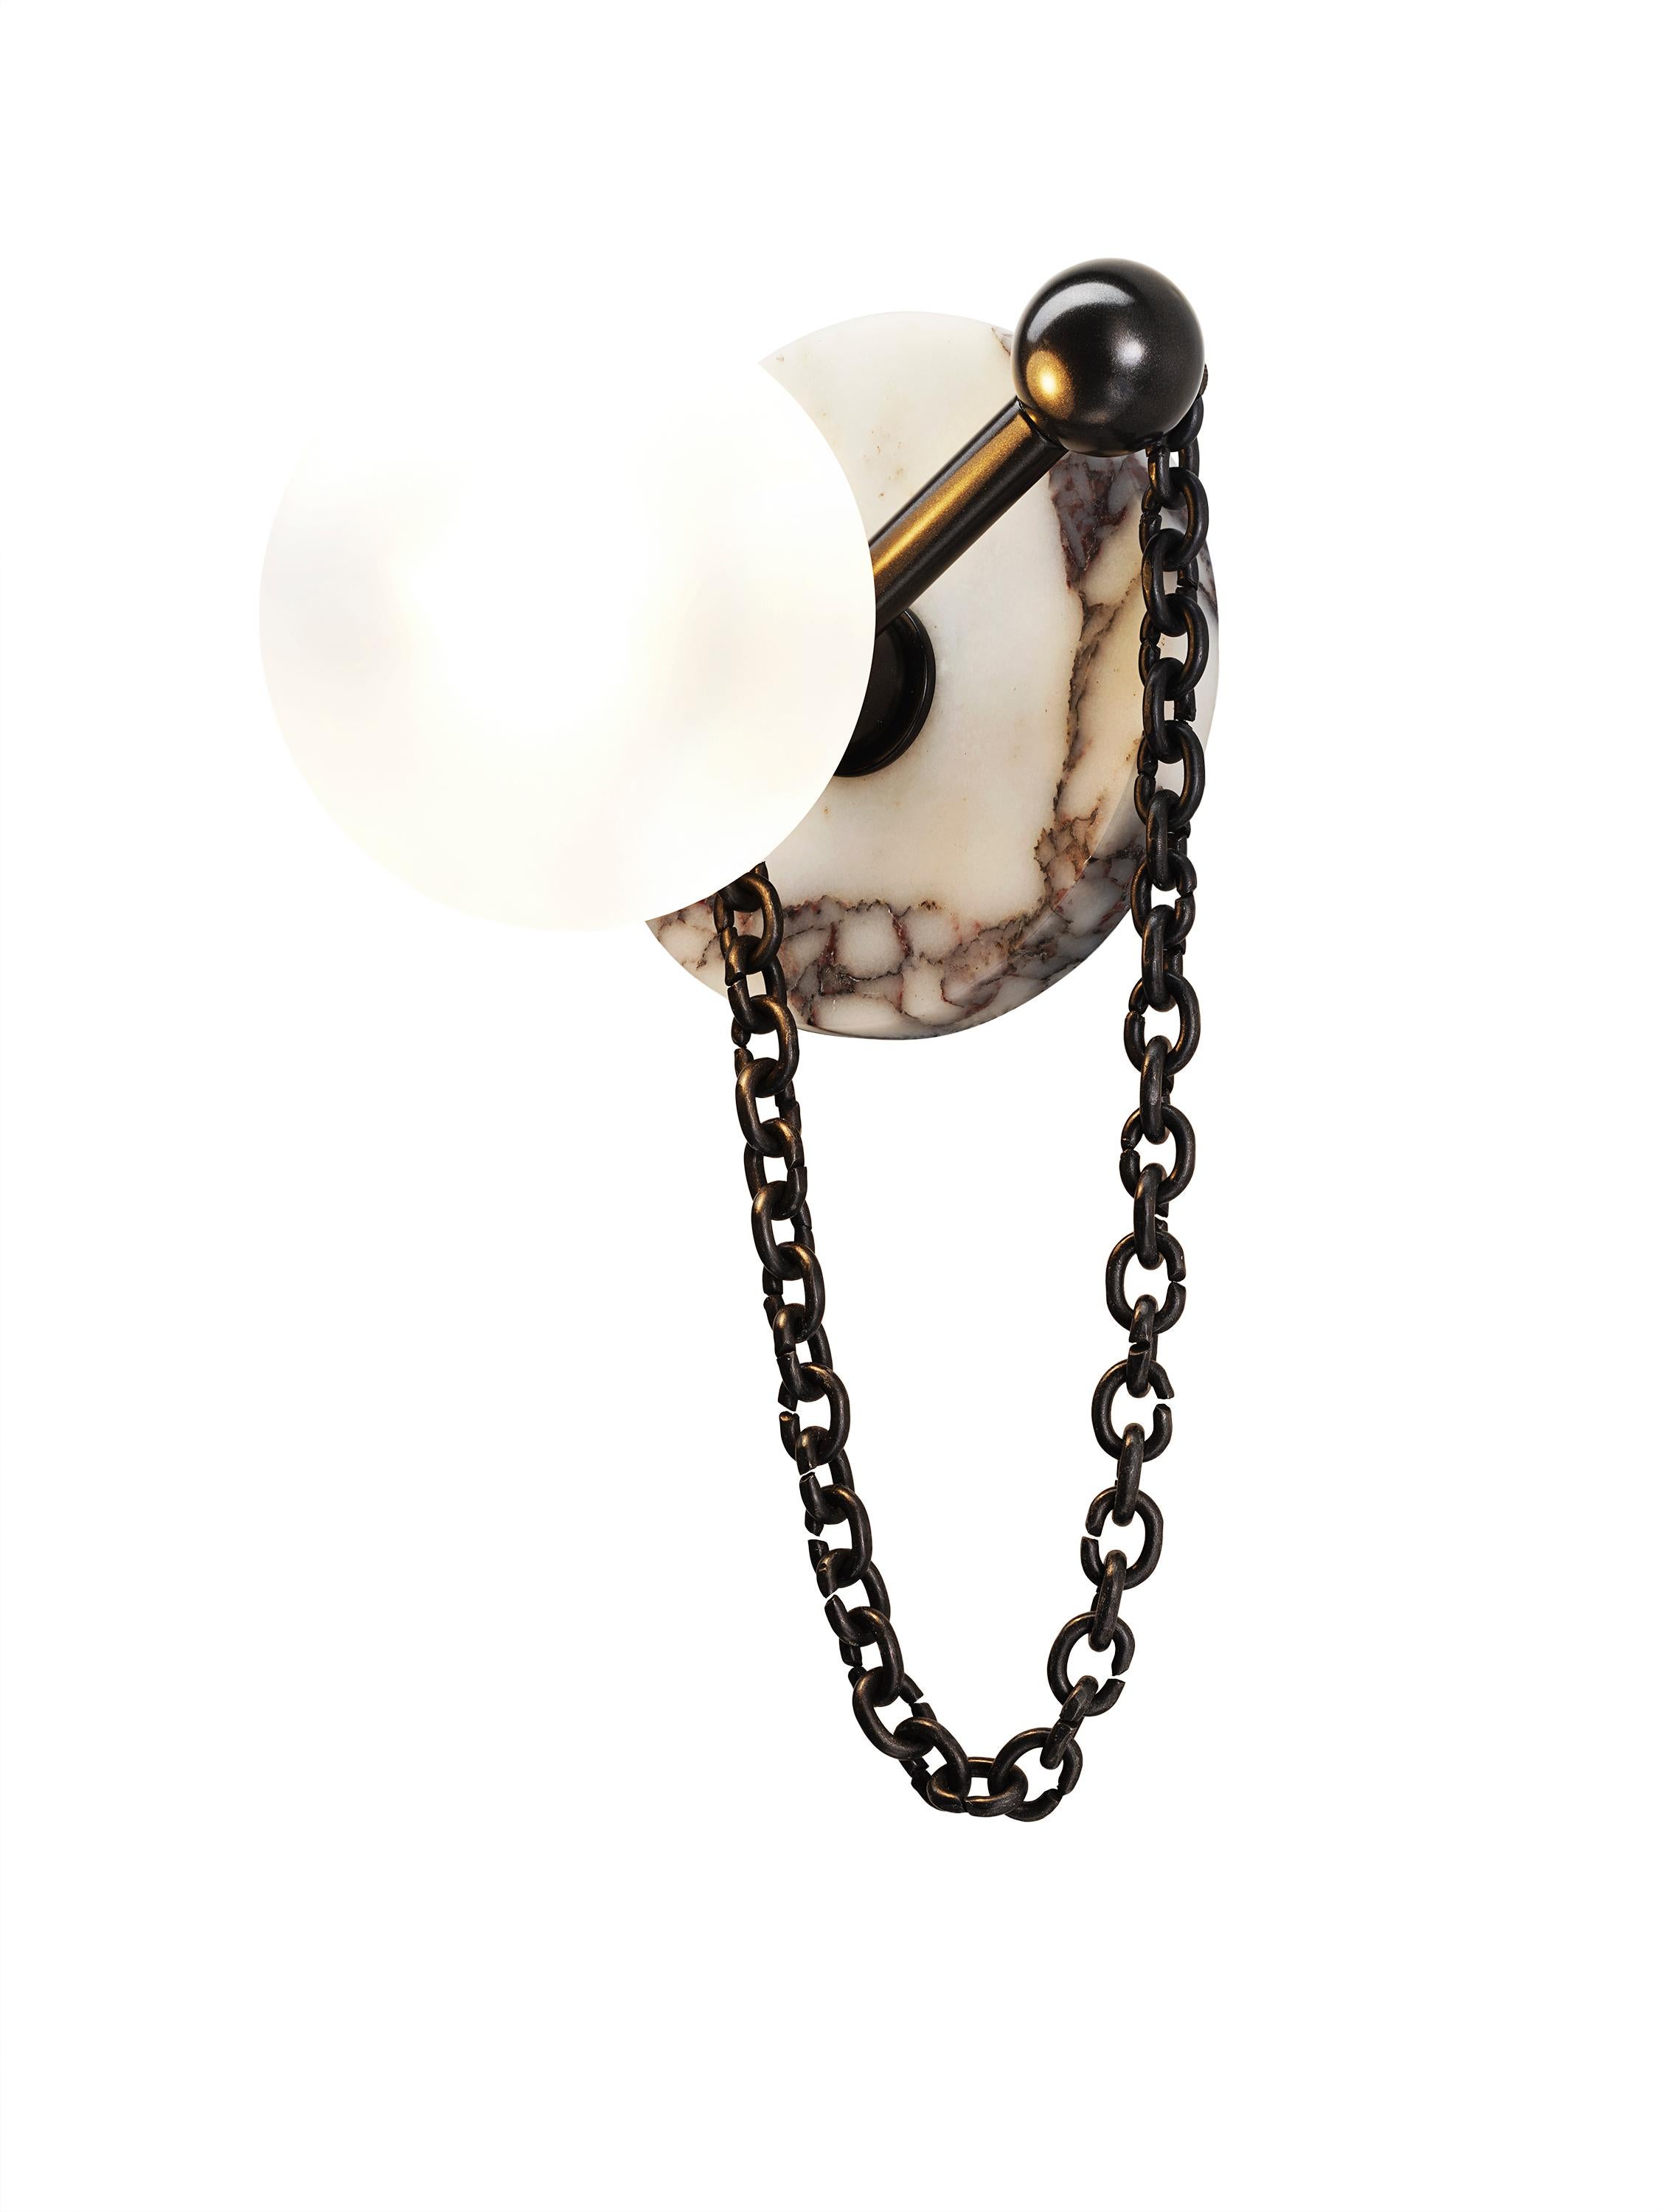 American ALLA Wall Sconce Calacatta Marble & Glass, Emily Del Bello x Blueprint Lighting For Sale